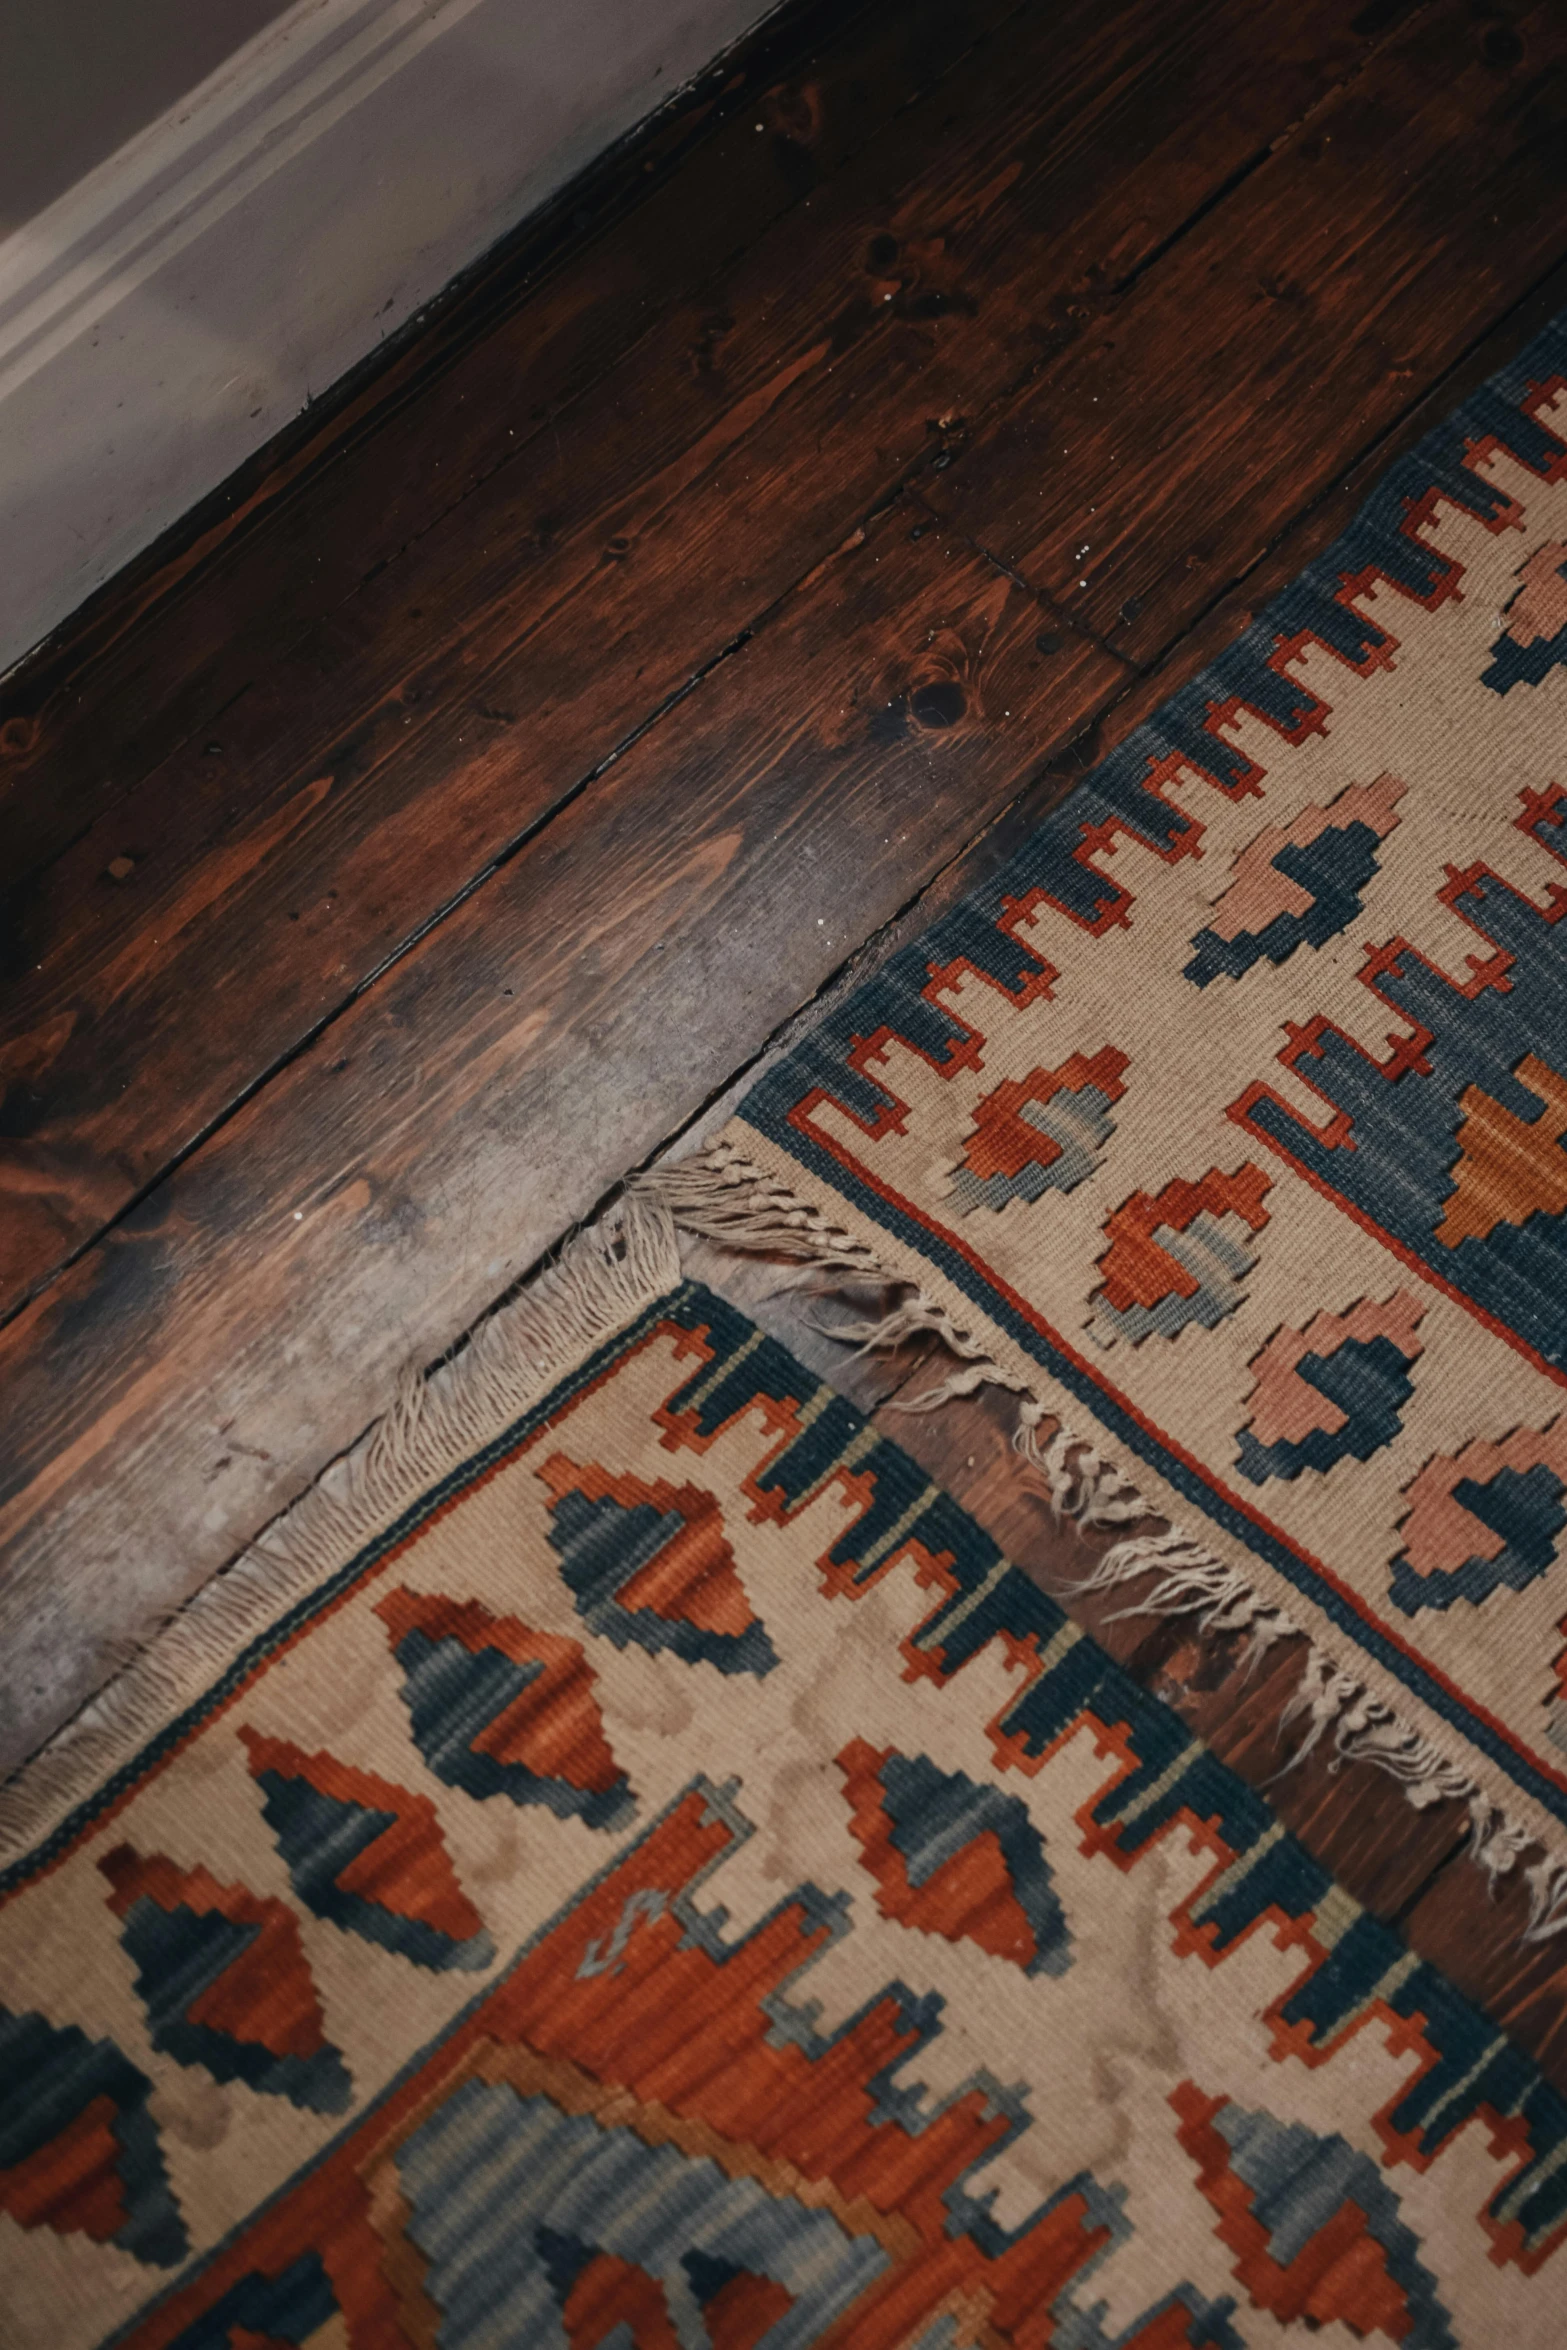 the view of an antique rug on the floor